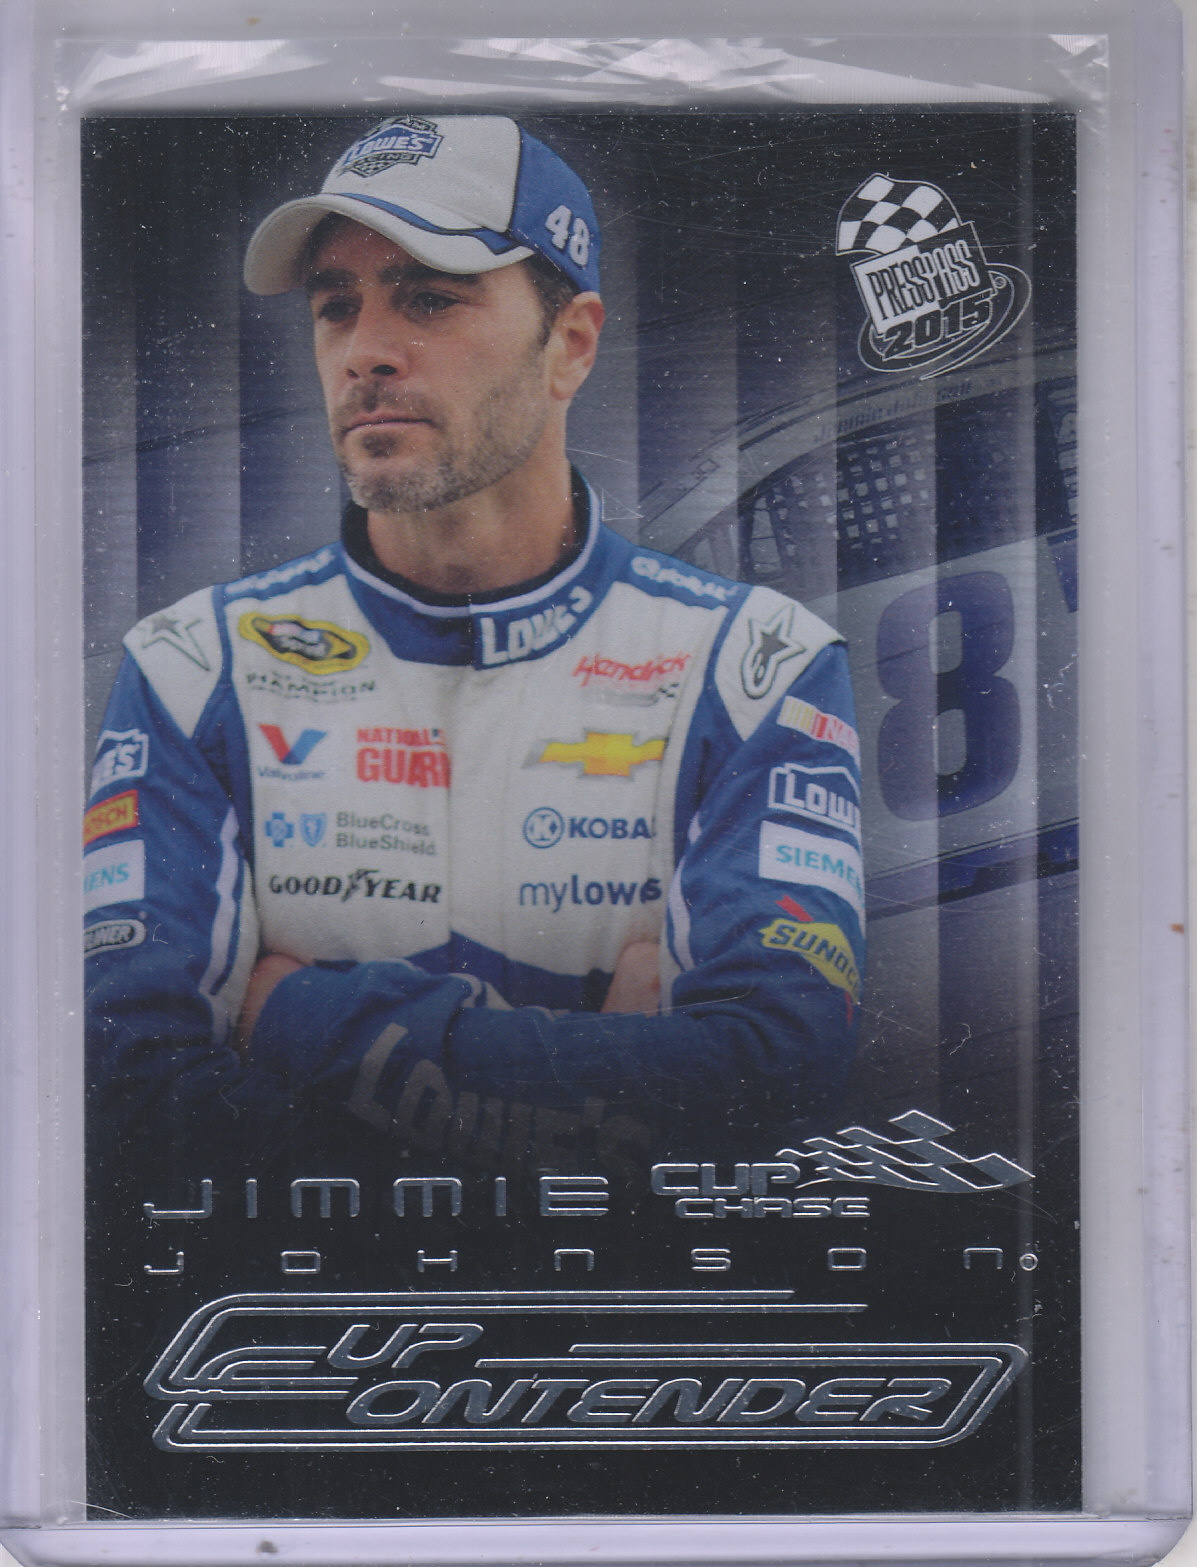 2015 Press Pass Cup Chase #81 Jimmie Johnson CC